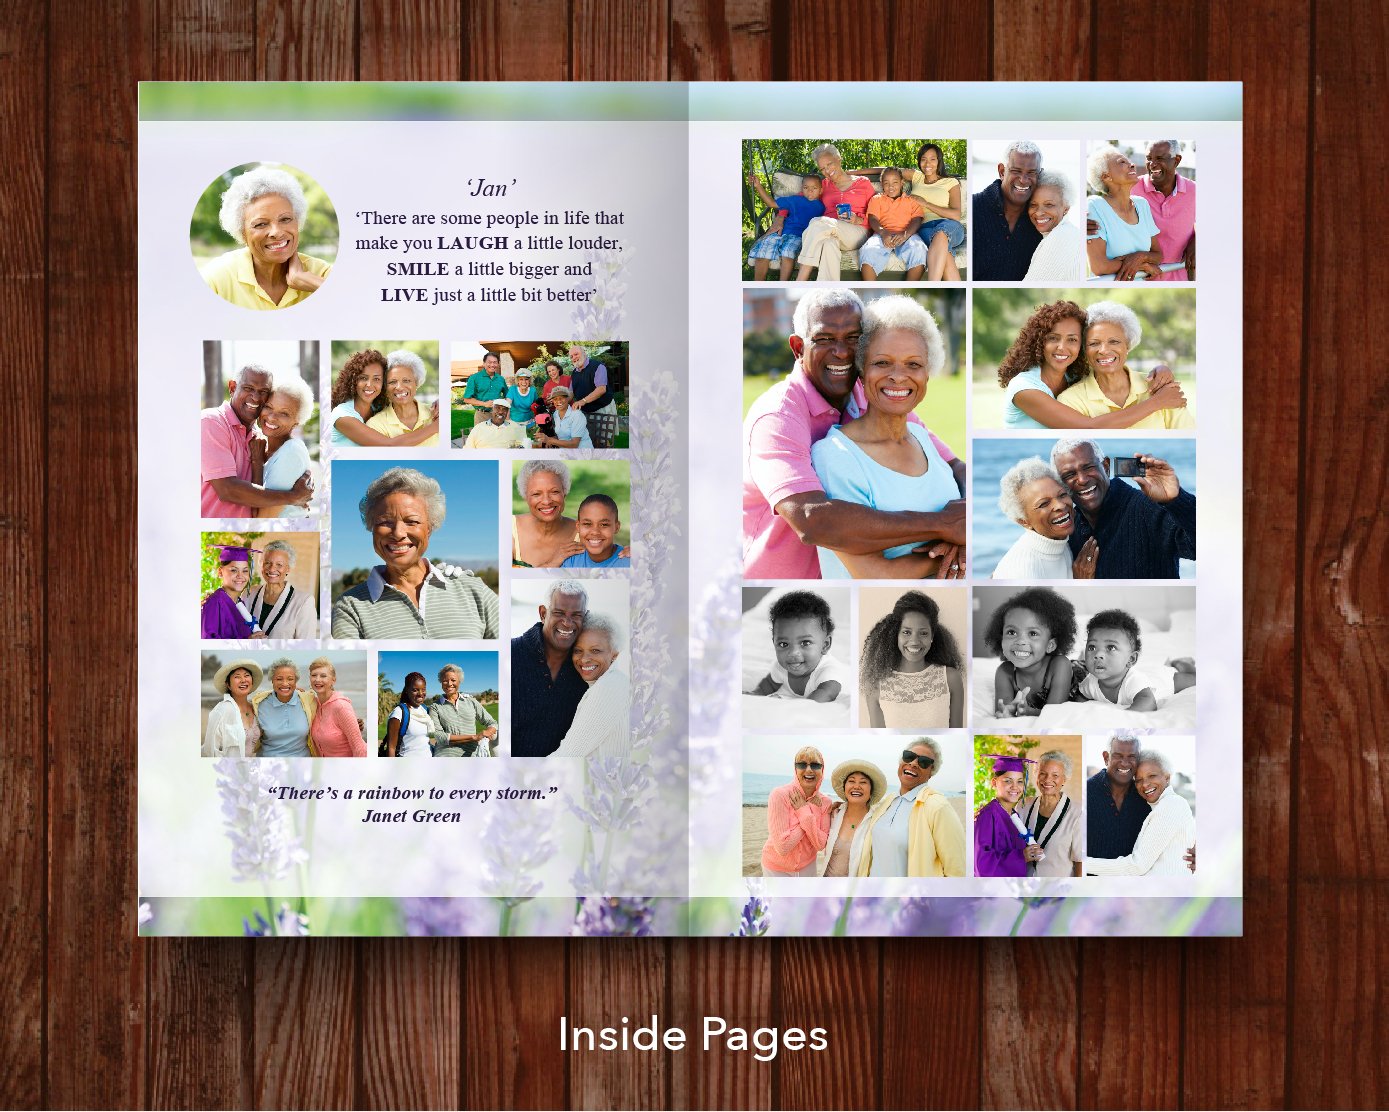 8 Page Lavender Funeral Program Template